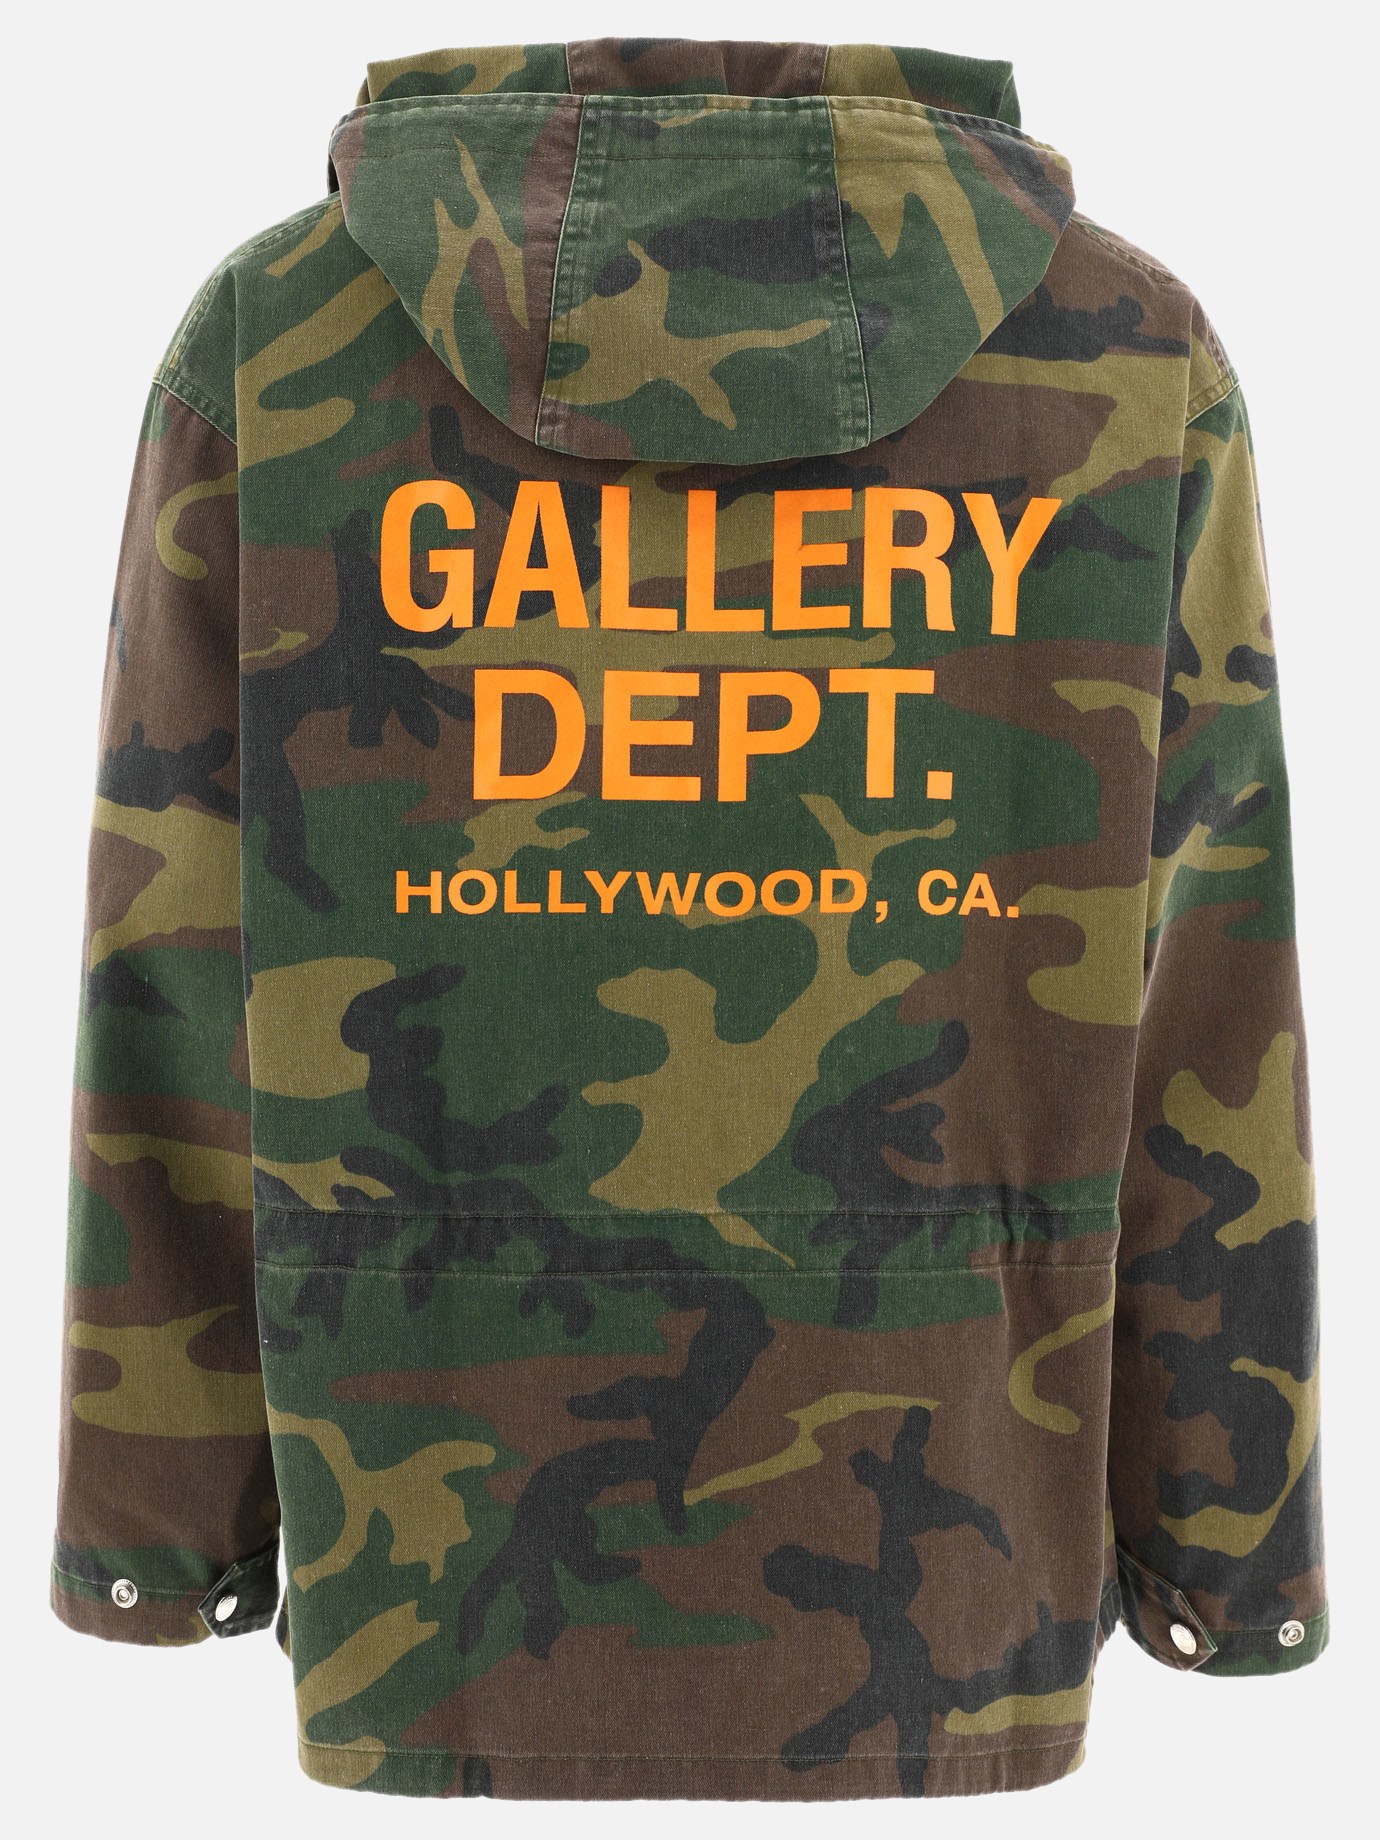 Giacca camouflage by Gallery Dept.